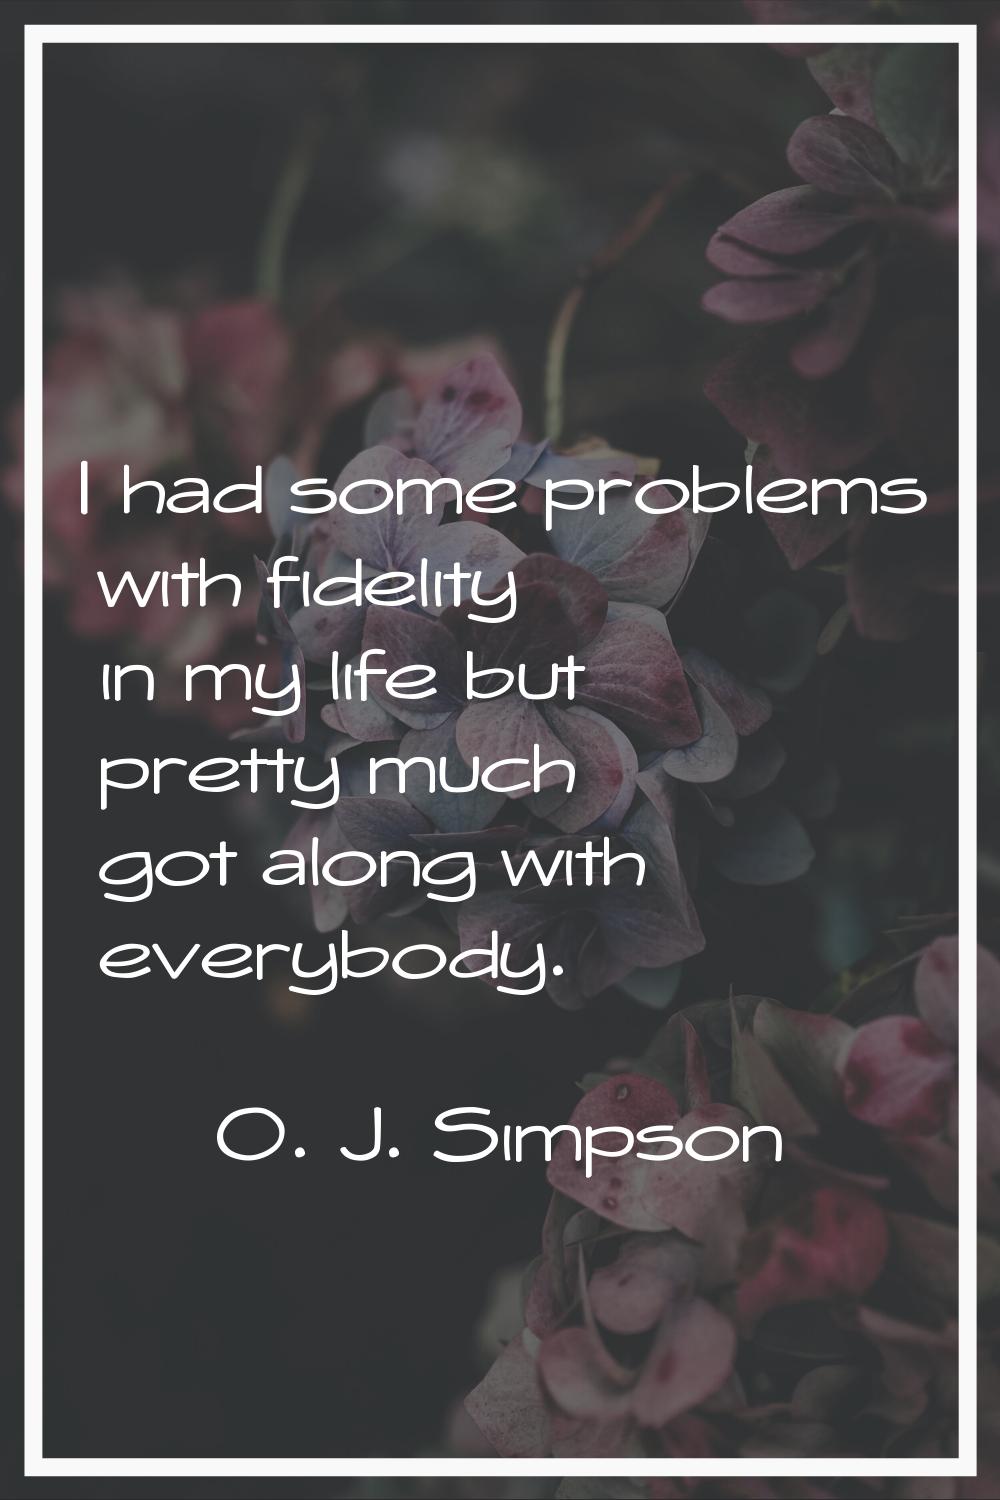 I had some problems with fidelity in my life but pretty much got along with everybody.